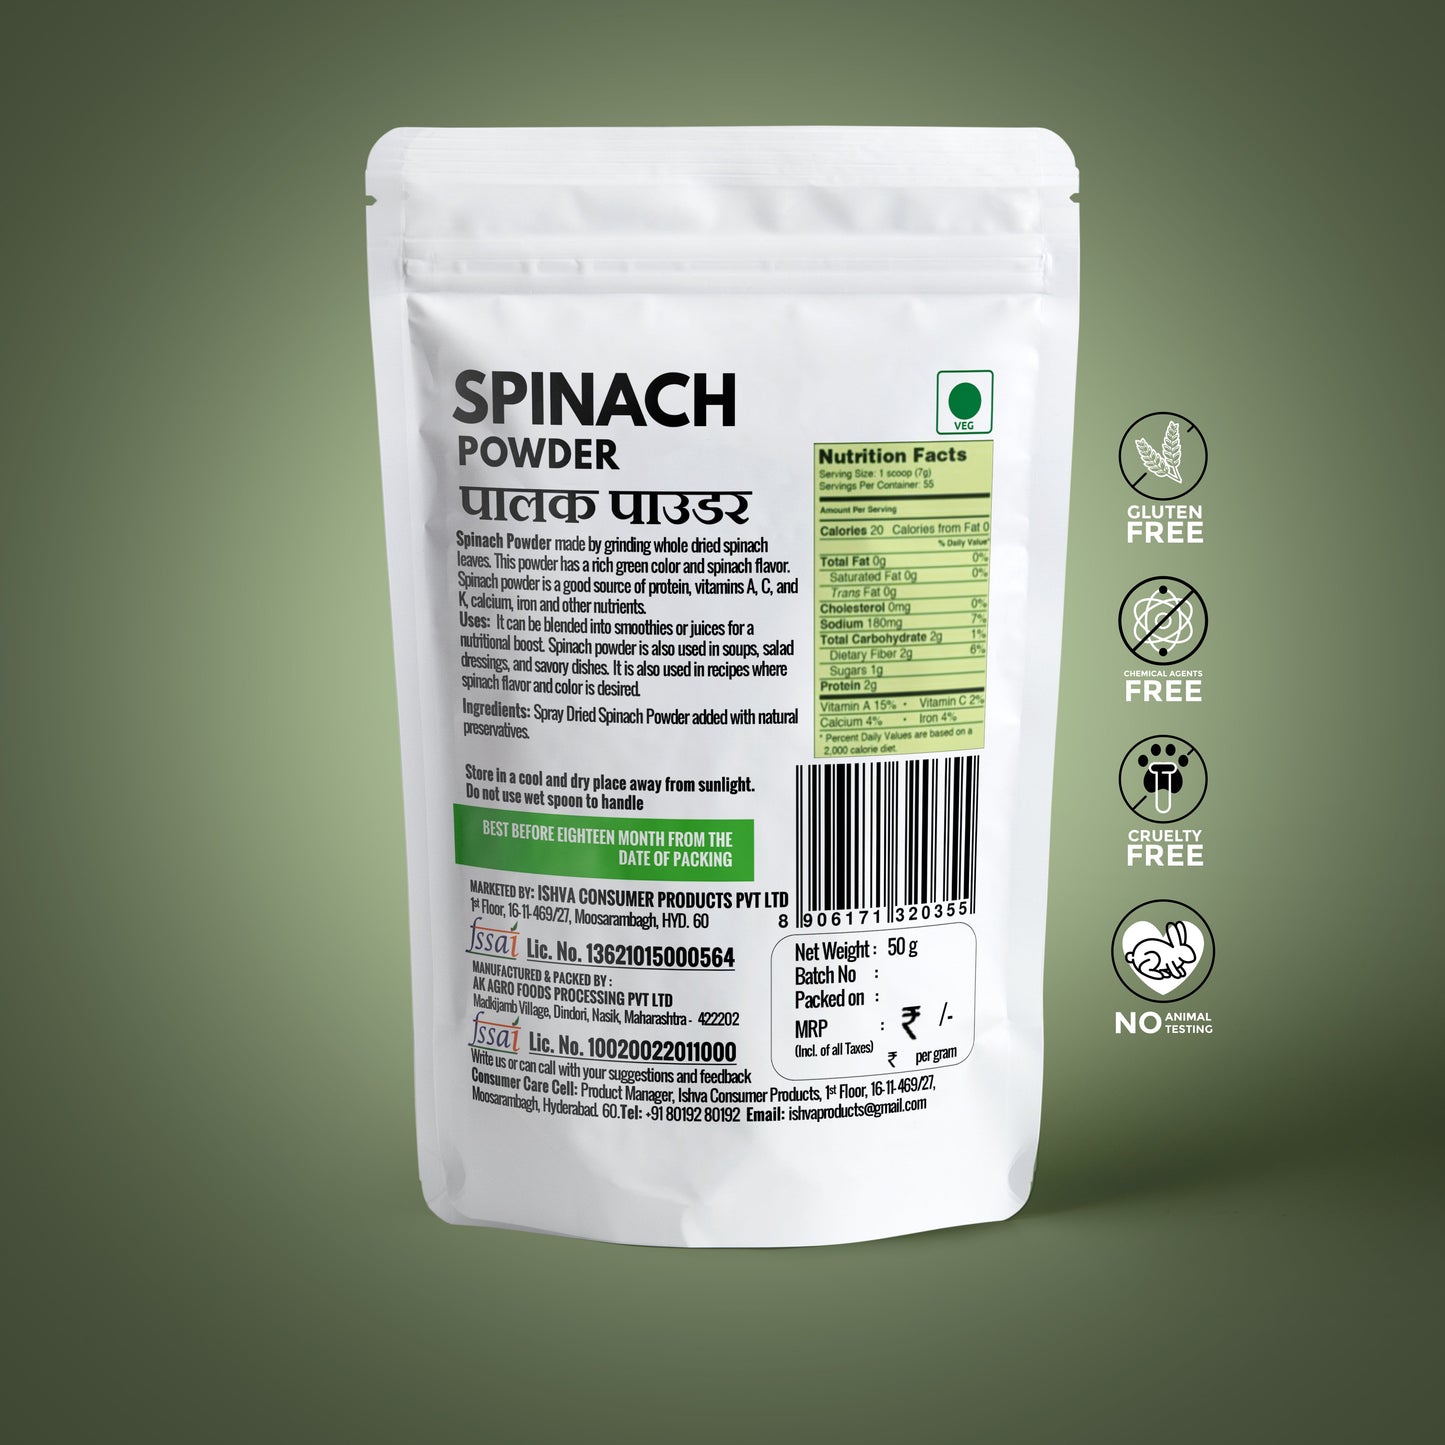 Ishva Spinach Powder - Flavor for Paste and Chutney